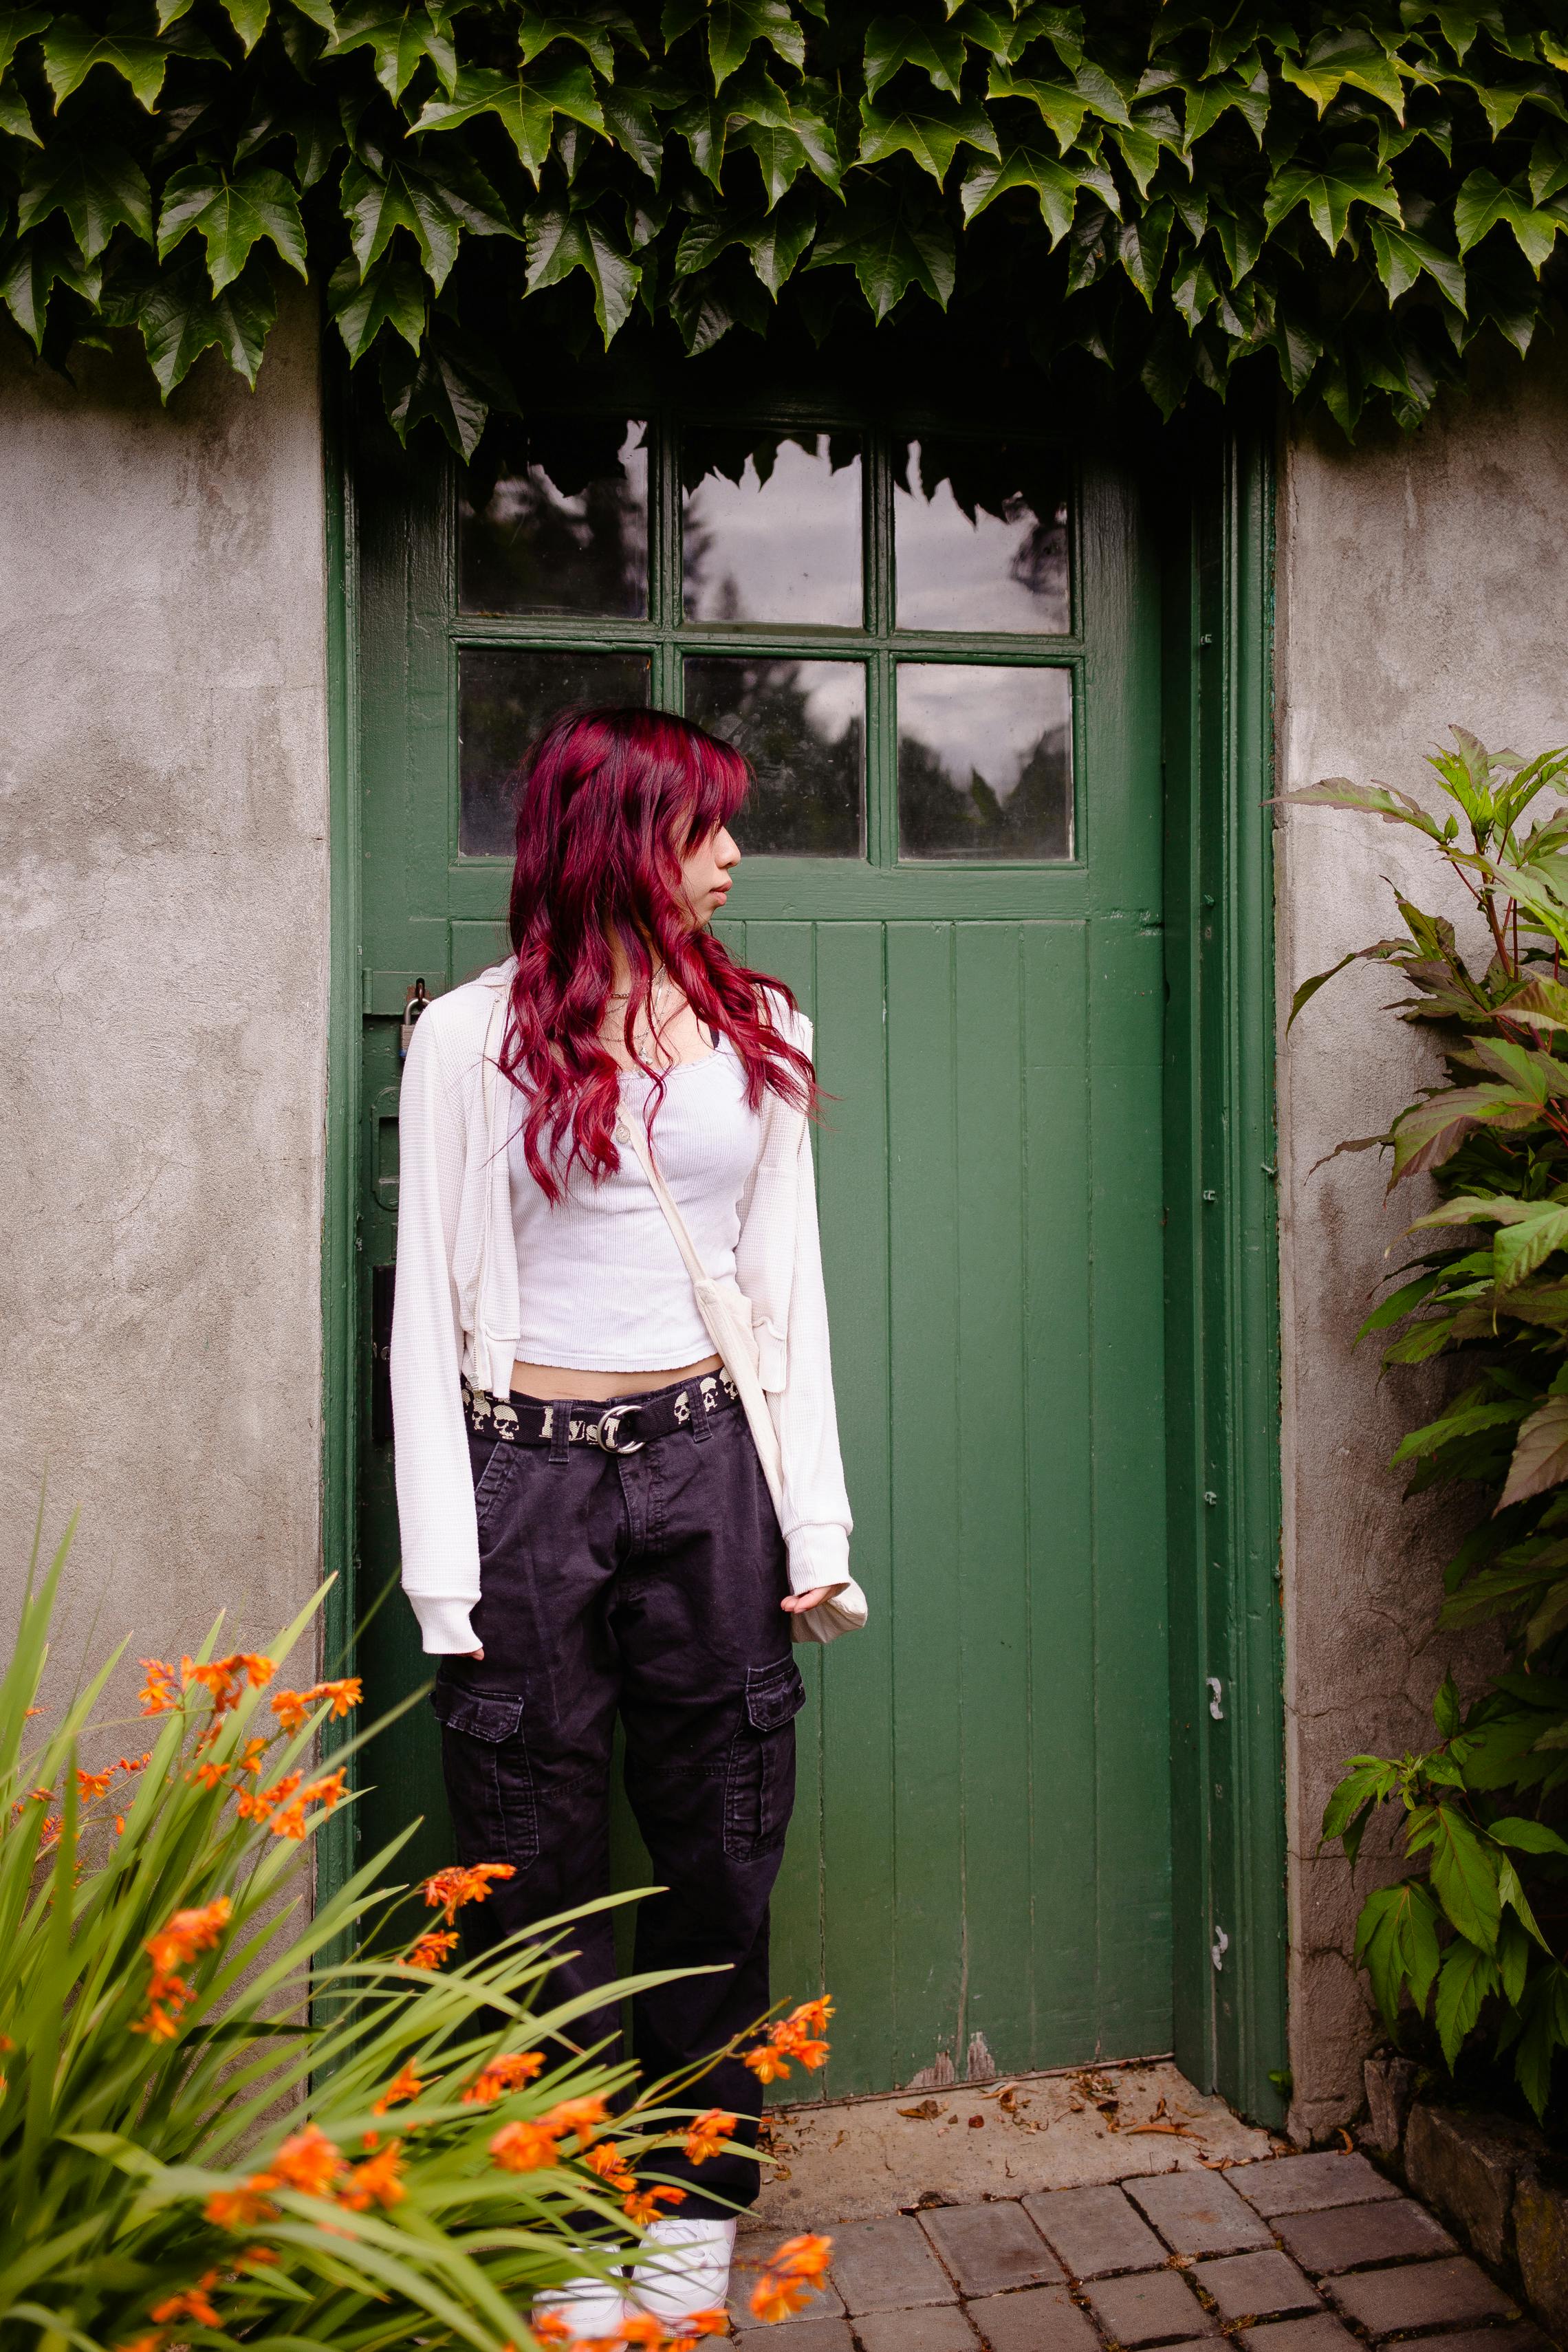 girl with dyed red hair standing in front of green front door